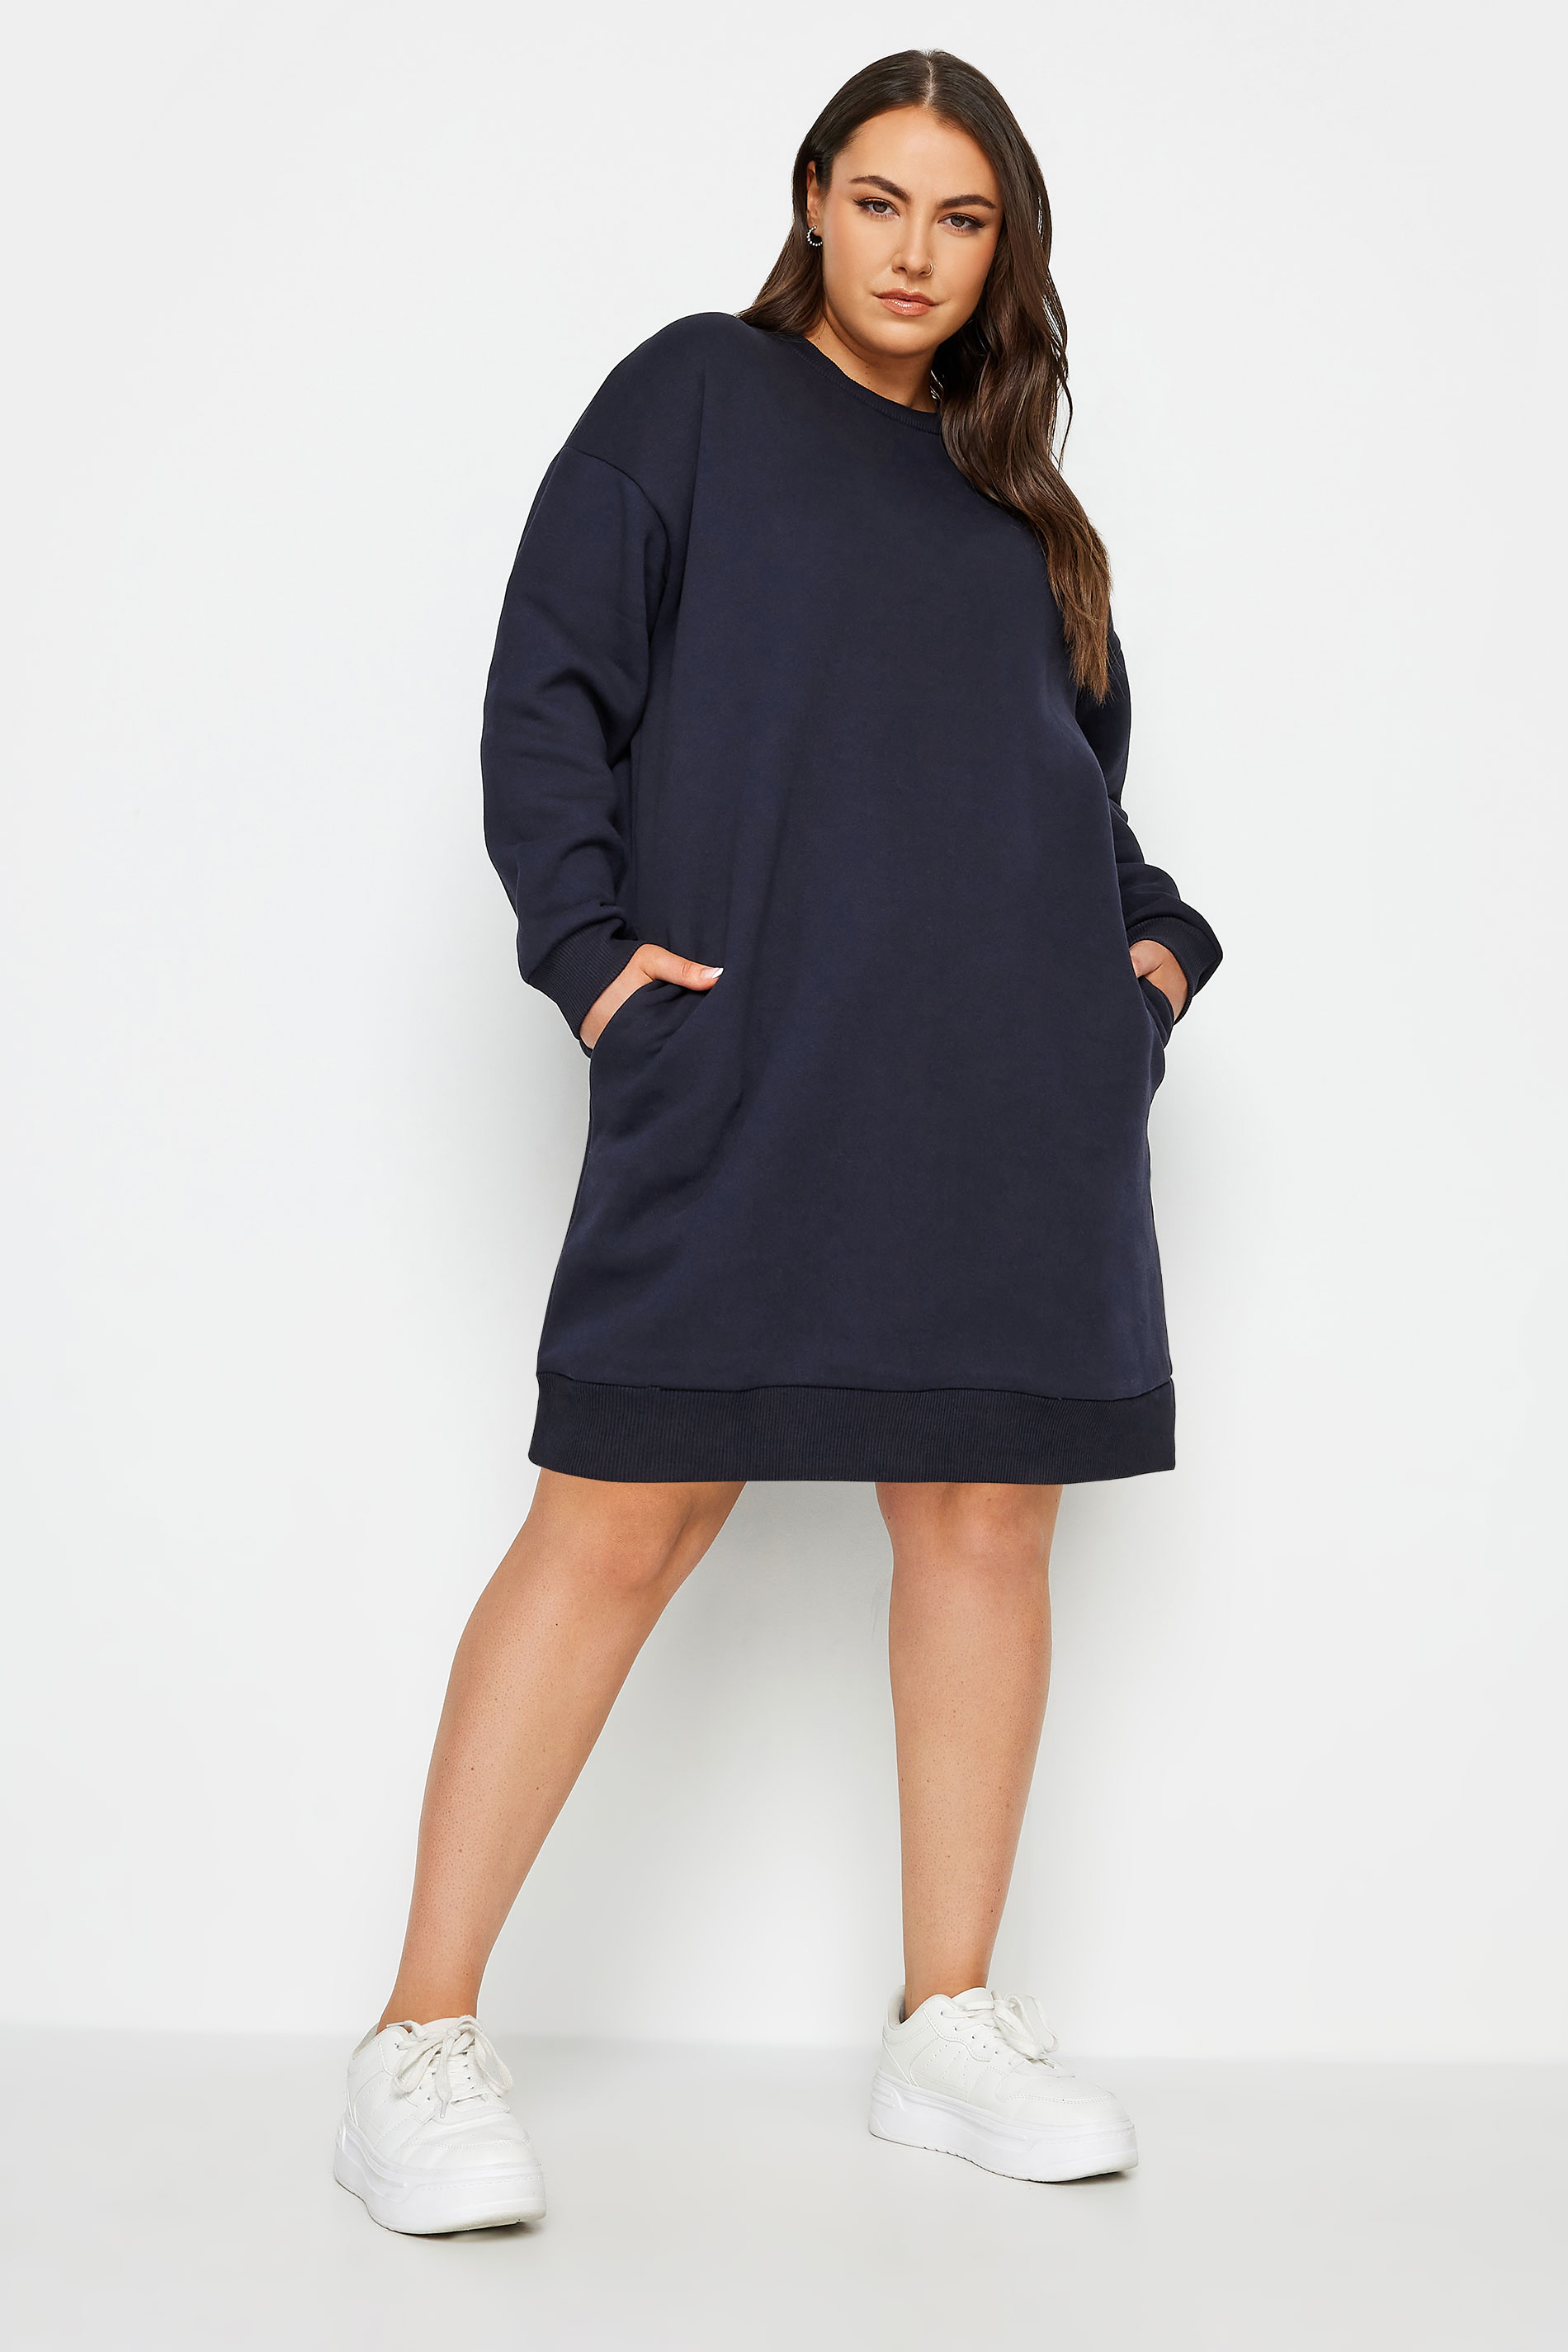 YOURS Plus Size Navy Blue Sweatshirt Dress | Yours Clothing 2